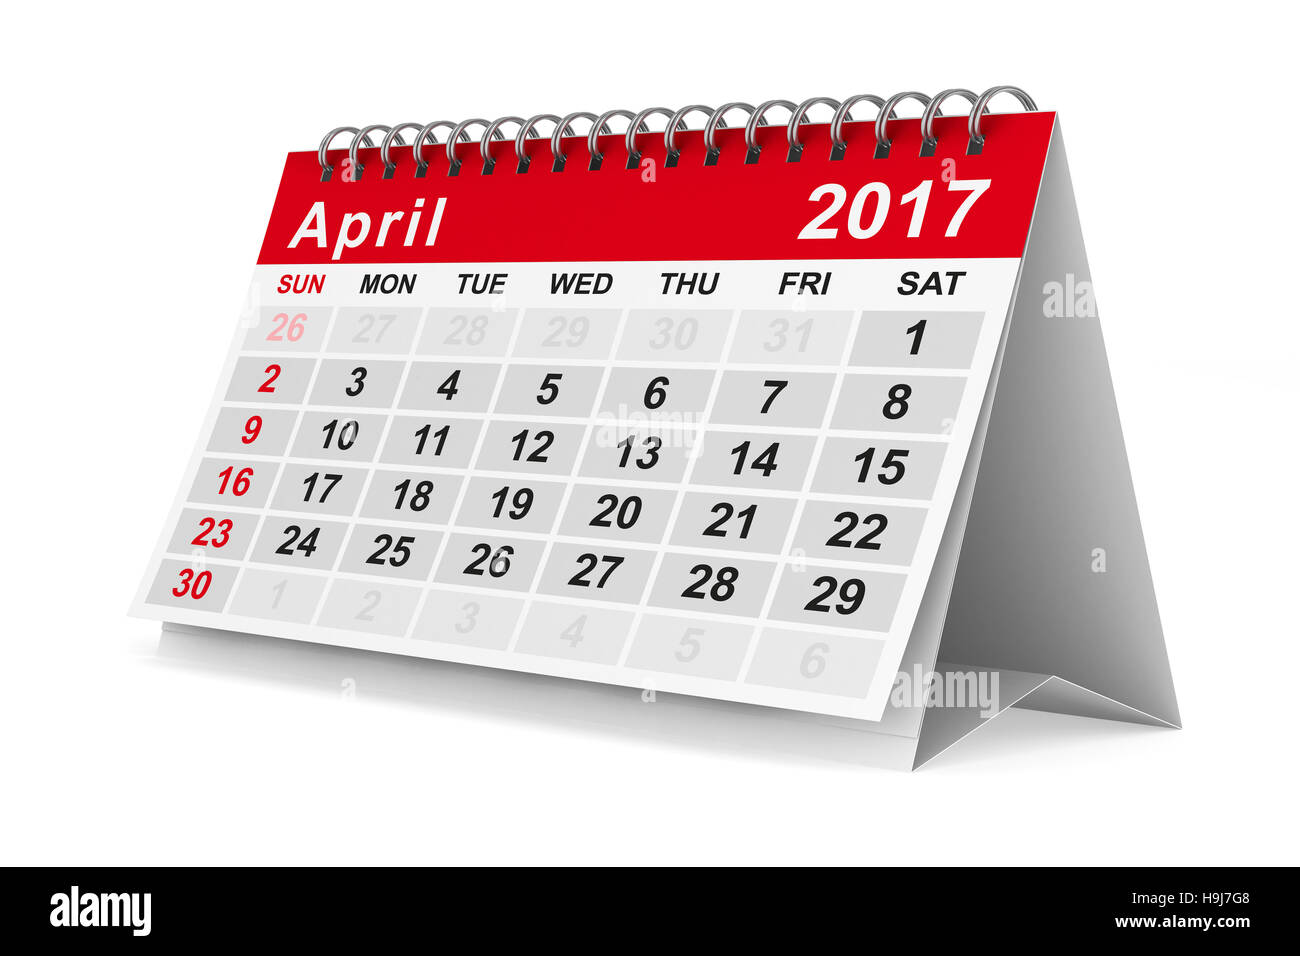 2017 year calendar. April. Isolated 3D image Stock Photo